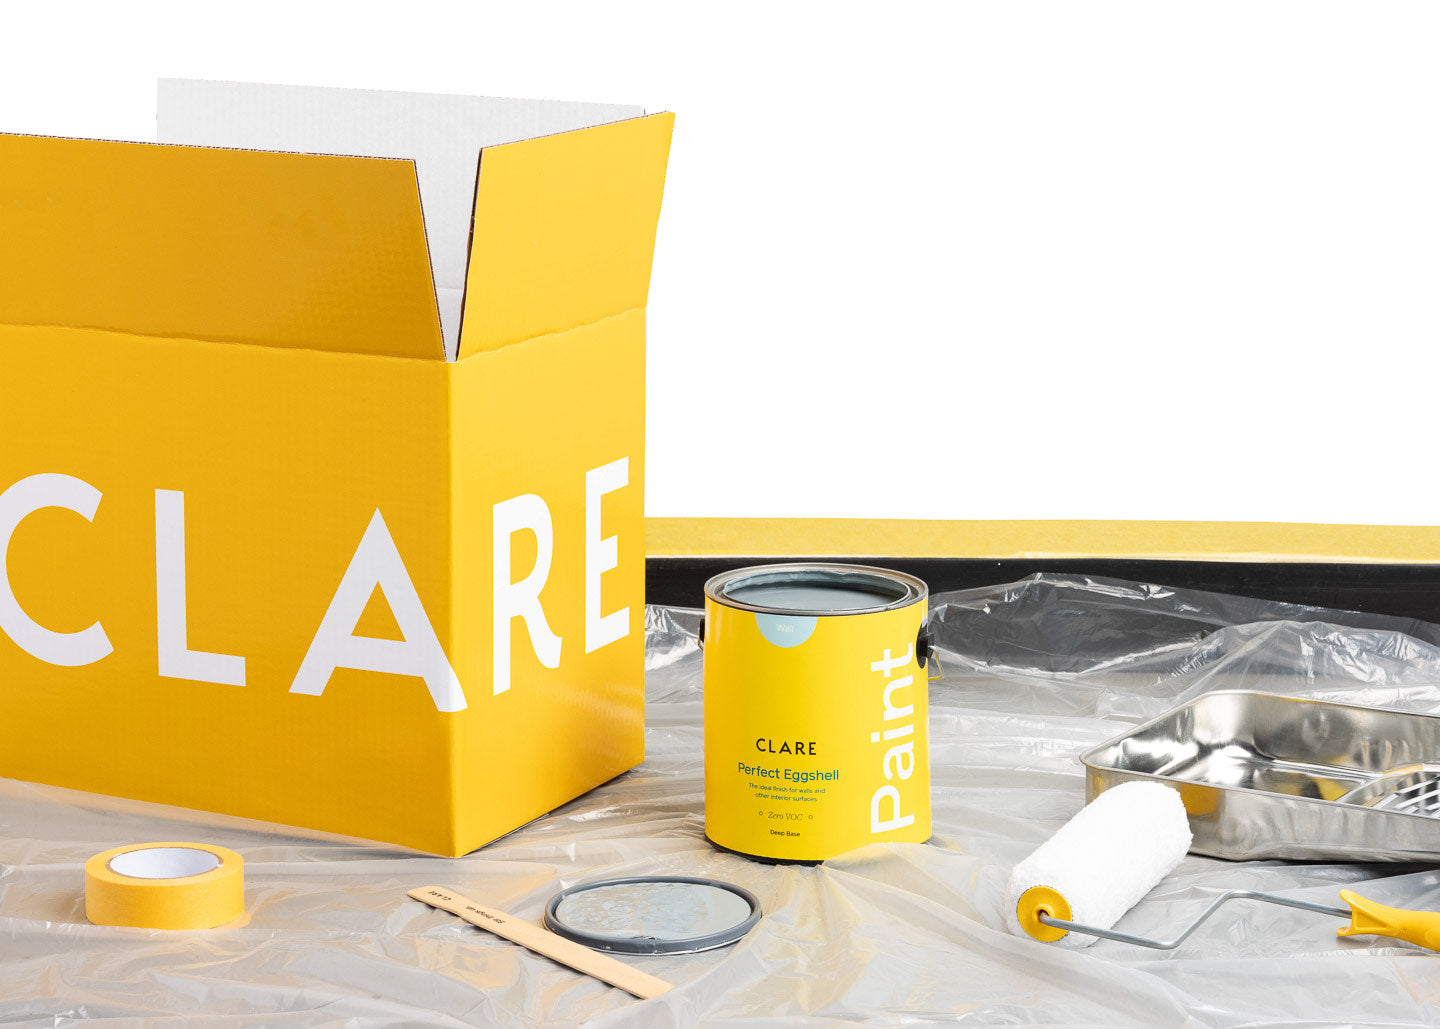 If you're looking to order paint online, here's our ultimate guide! Learn what to expect, how to buy high-quality paint supplies, how much paint you'll need, and more!